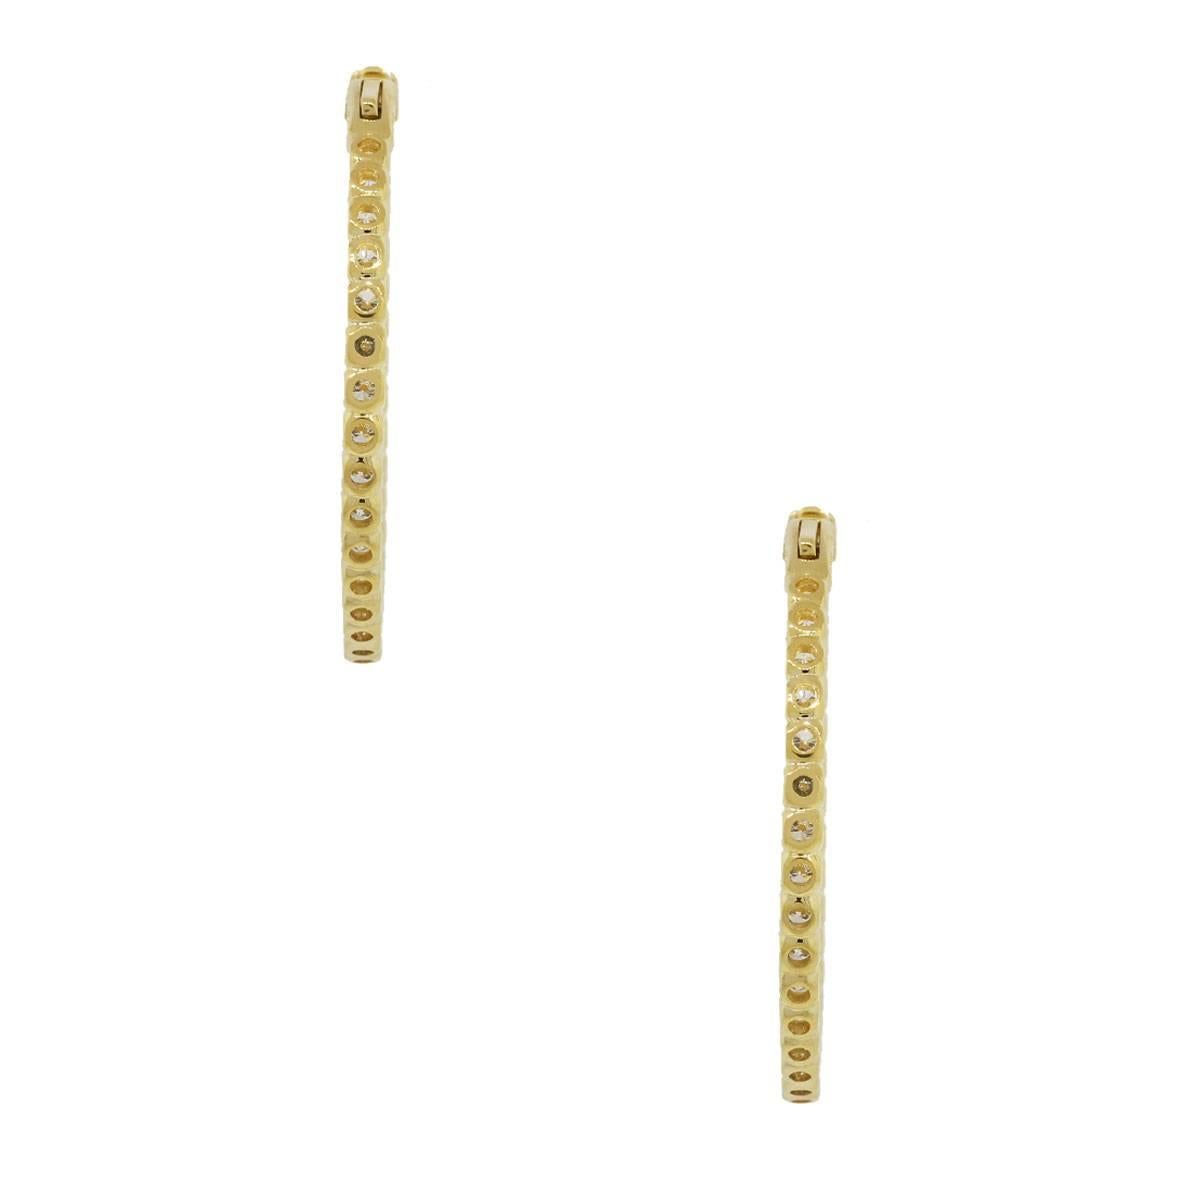 Material: 14k yellow gold
Diamond Details: Approximately 7.15ctw of round brilliant diamonds. Diamonds are G/H in color and VS in clarity.
Measurements: 2″ x 0.20″ x 2″
Clasp: Hinged post back closure
Total Weight: 17.9g (11.5dwt)
SKU: A30311453